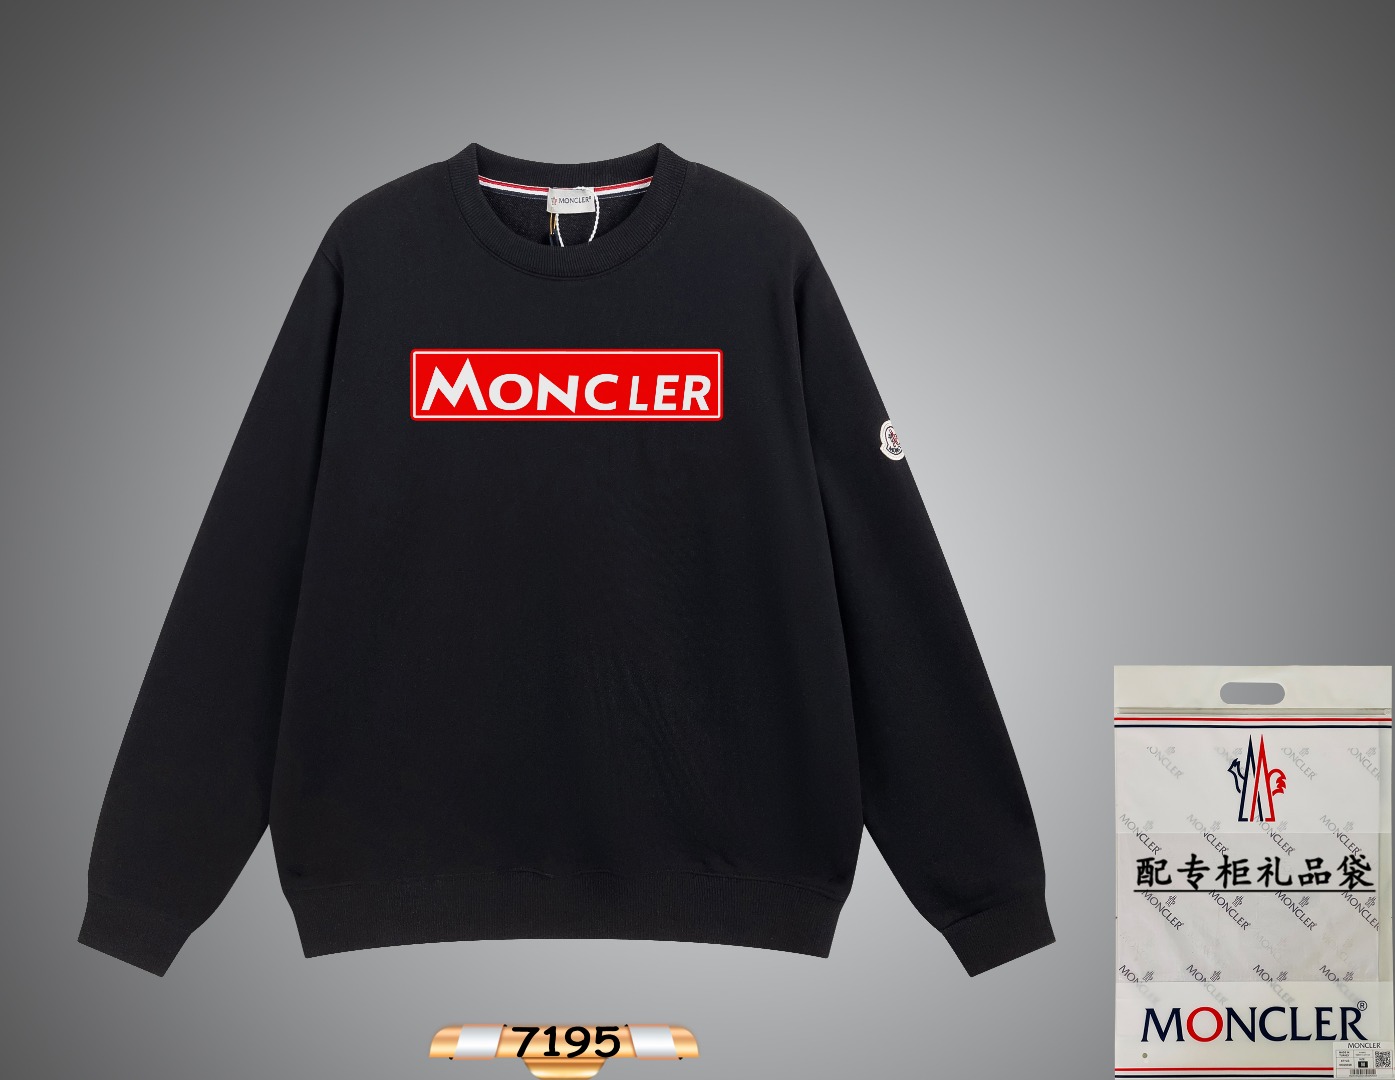 Moncler Clothing Sweatshirts Best knockoff
 Black White Printing Unisex Fall/Winter Collection Fashion